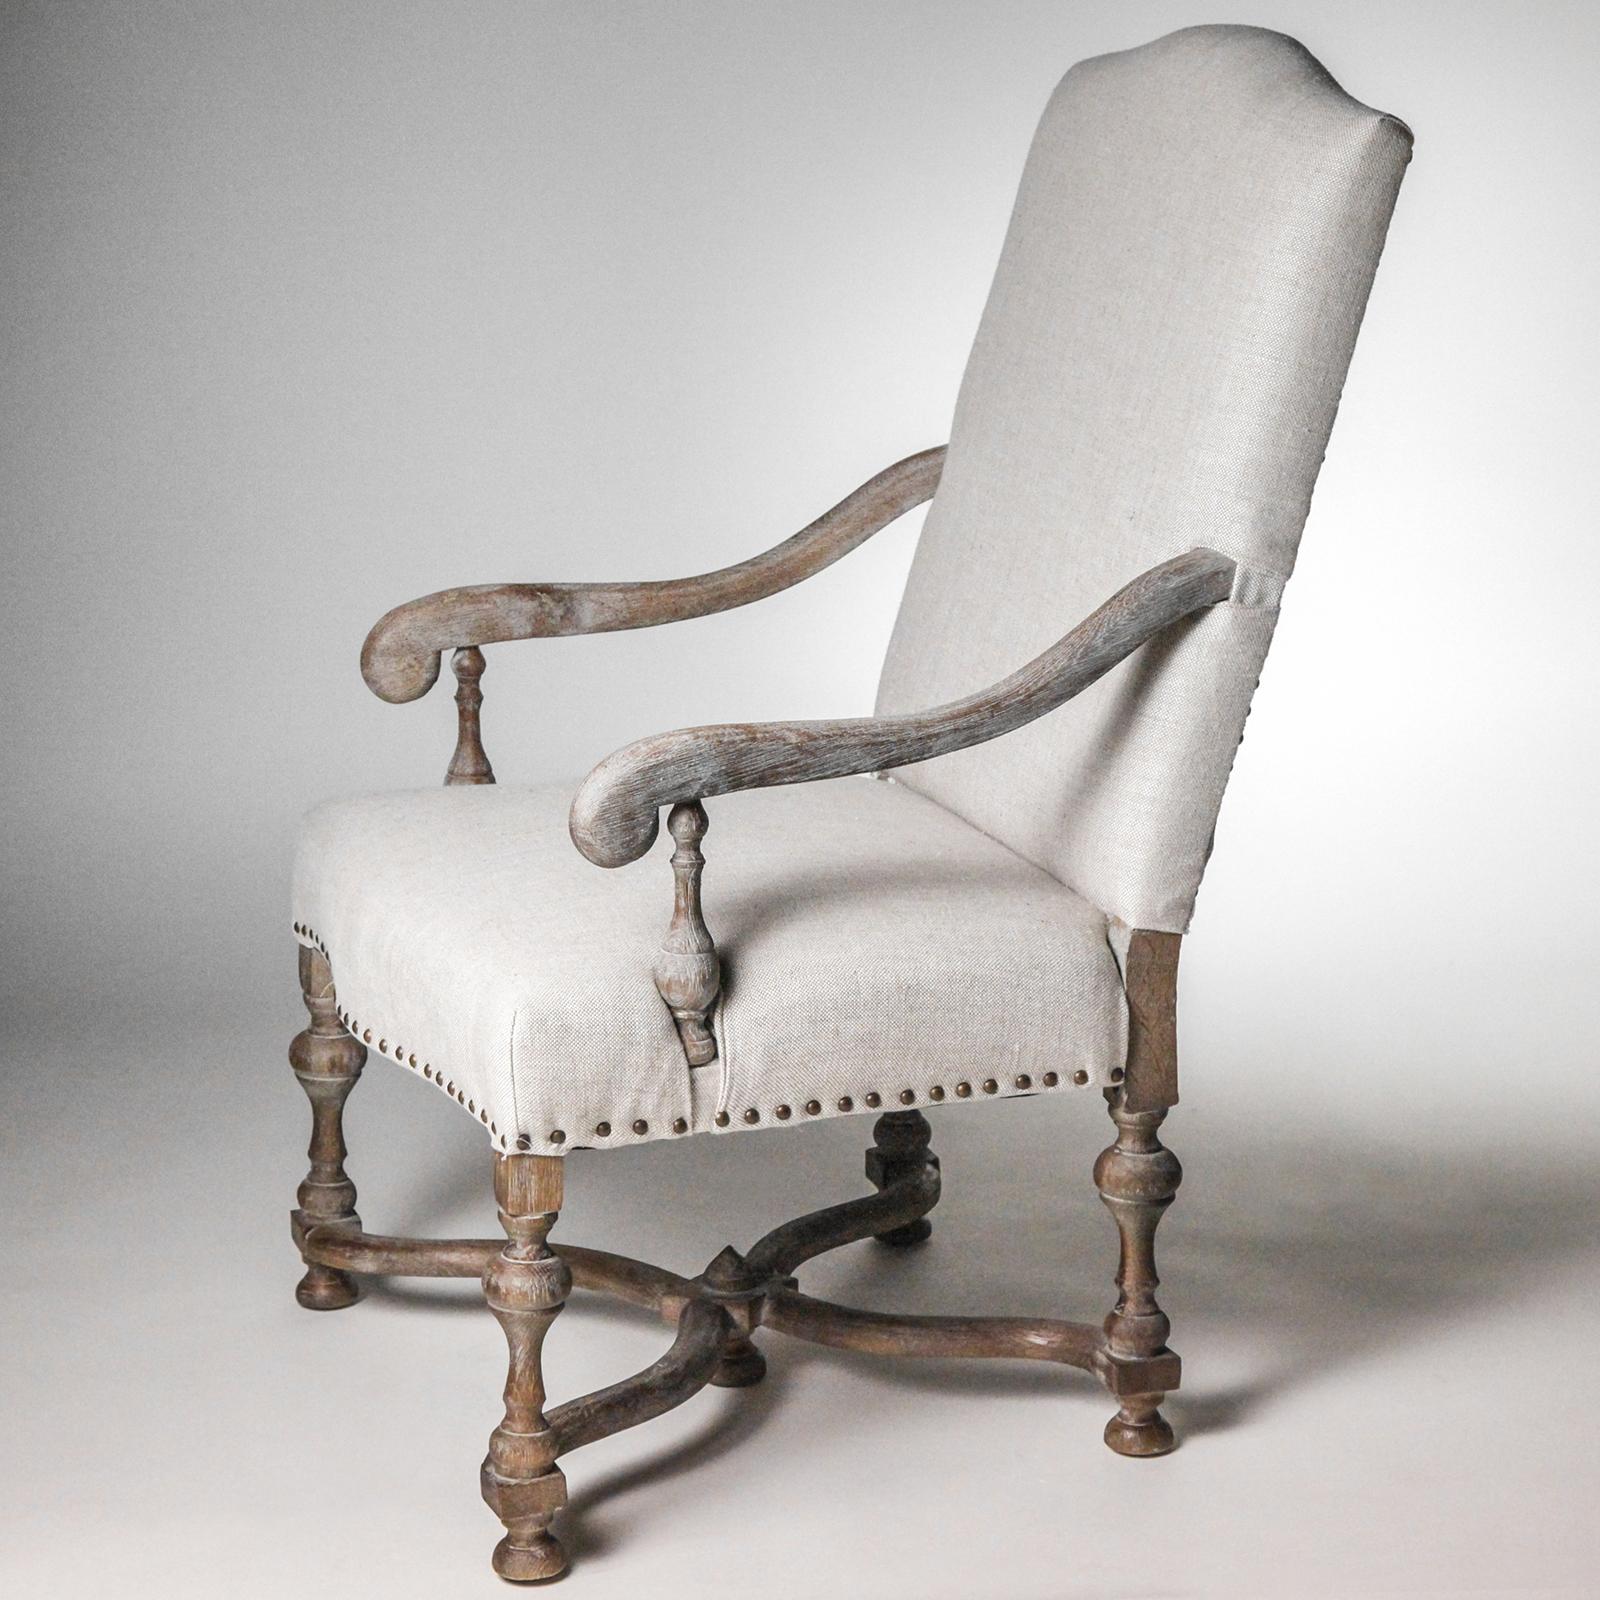 Traditional Oxford style chair with carved and scrolled arms, legs and stretcher. Natural linen fabric seat and back.